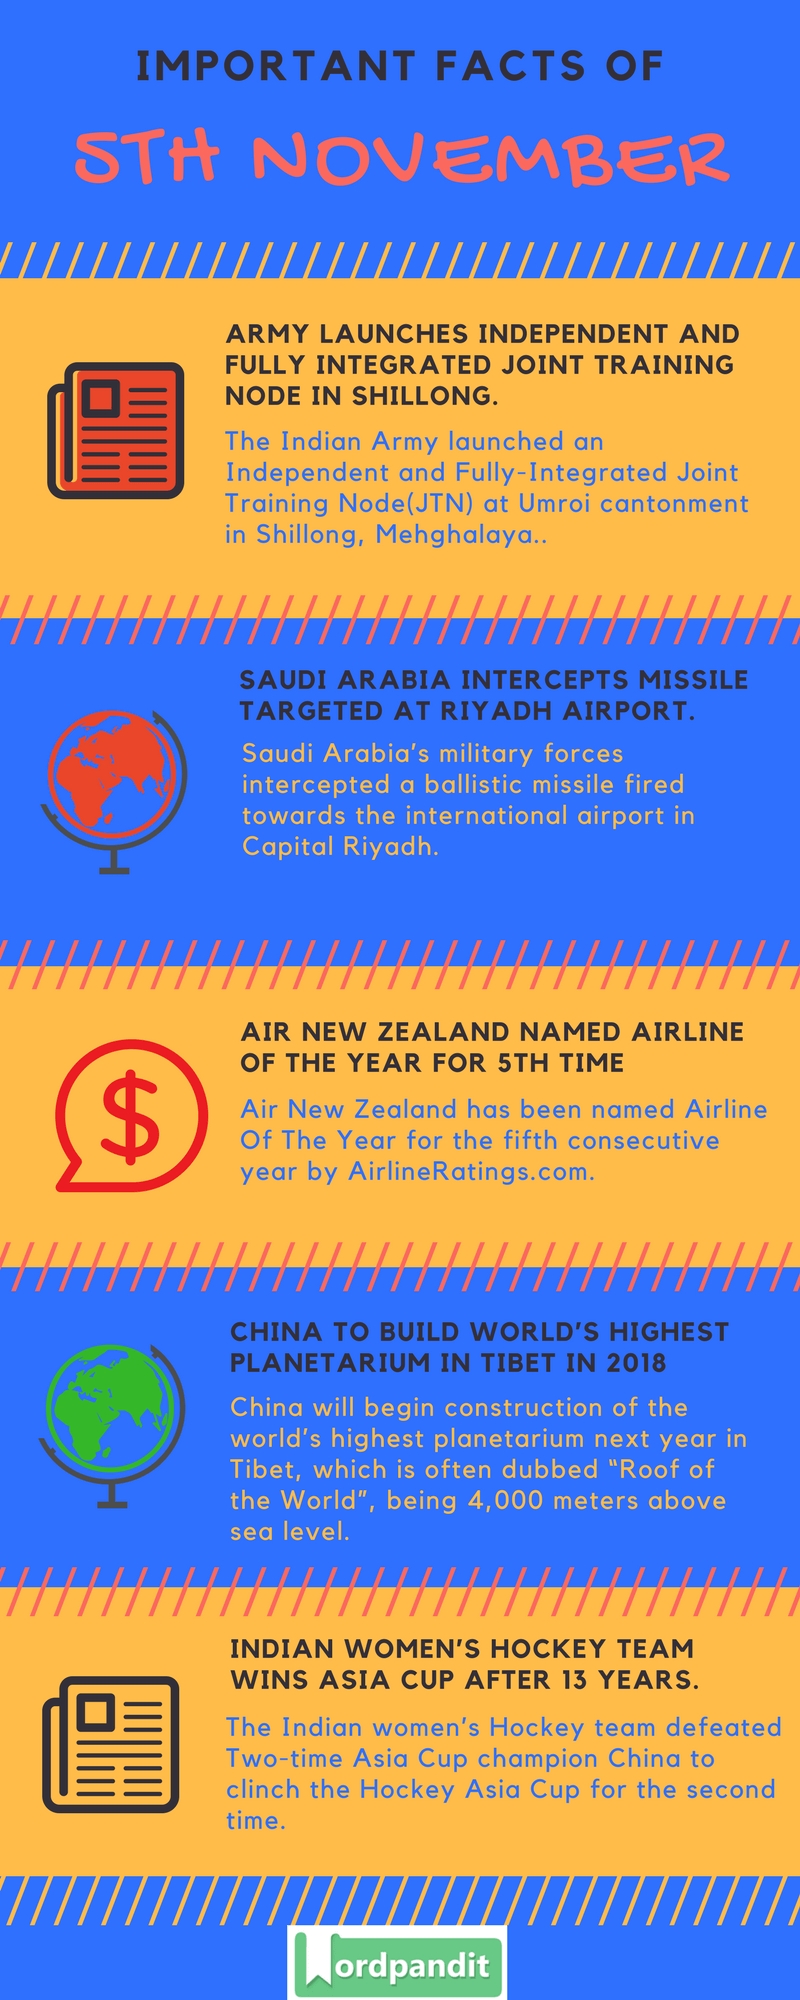 Daily-Current-Affairs-5-november-2017-Current-Affairs-Quiz-october-24-2017-Current-Affairs-Infographic